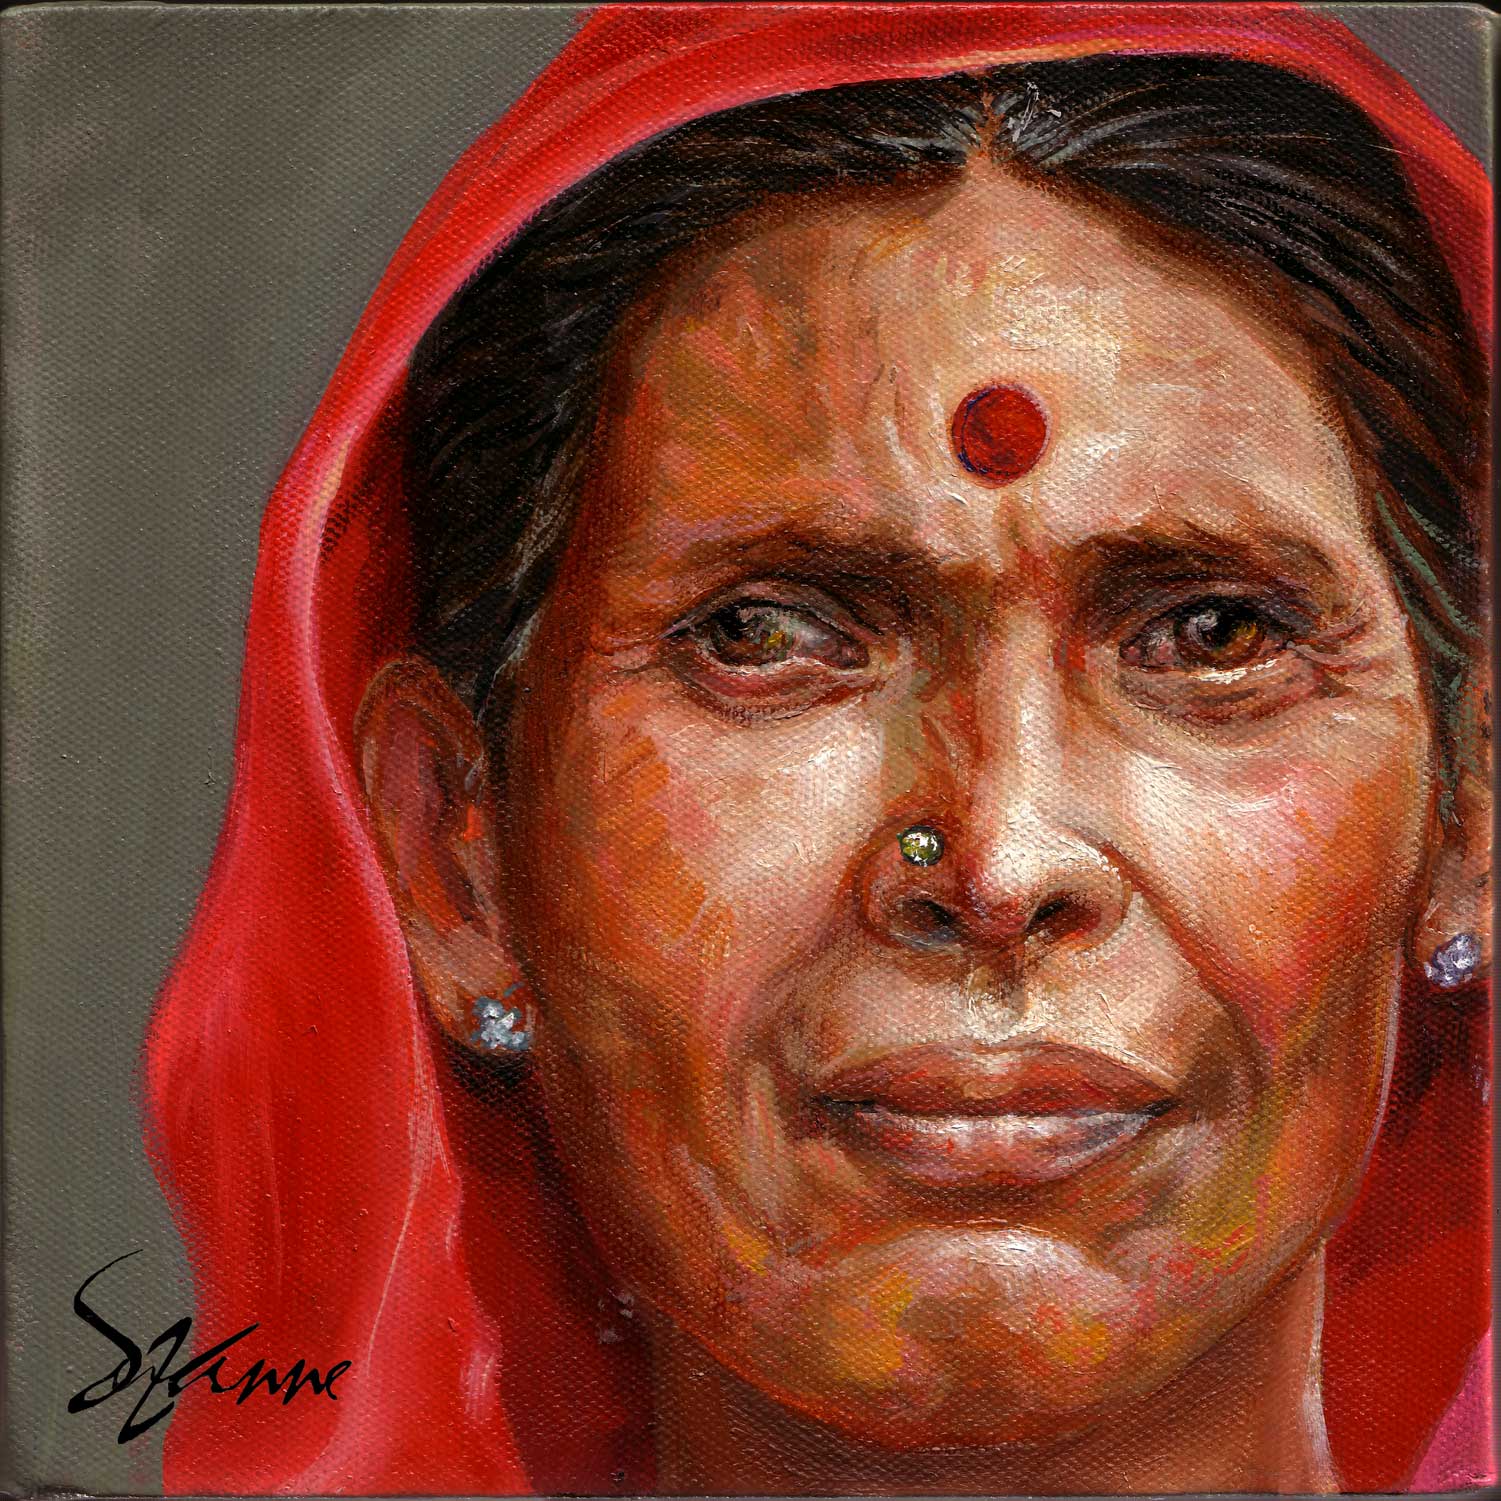 woman-from-india-sm1